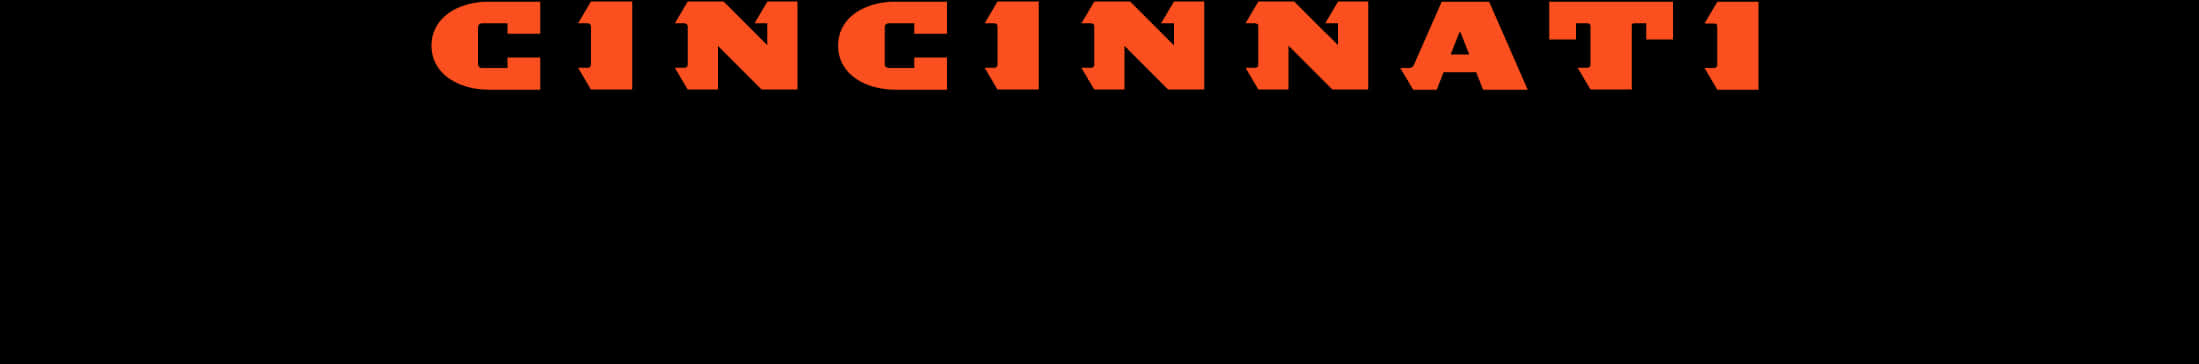 A Black Background With Orange Letters